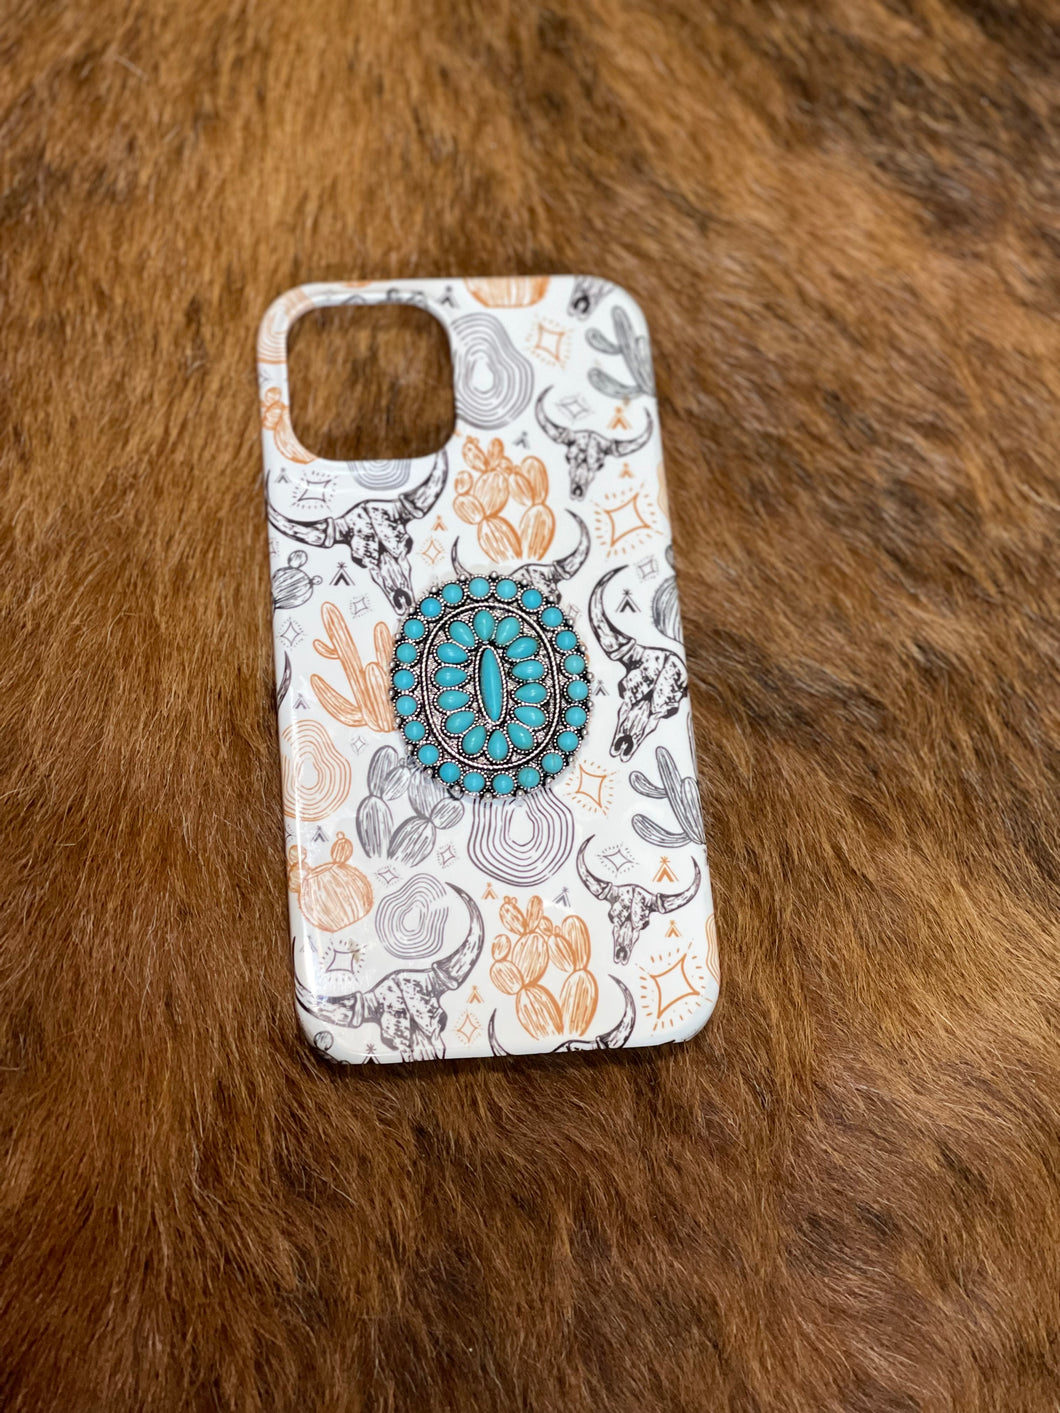 Turquoise Cell Phone Charm